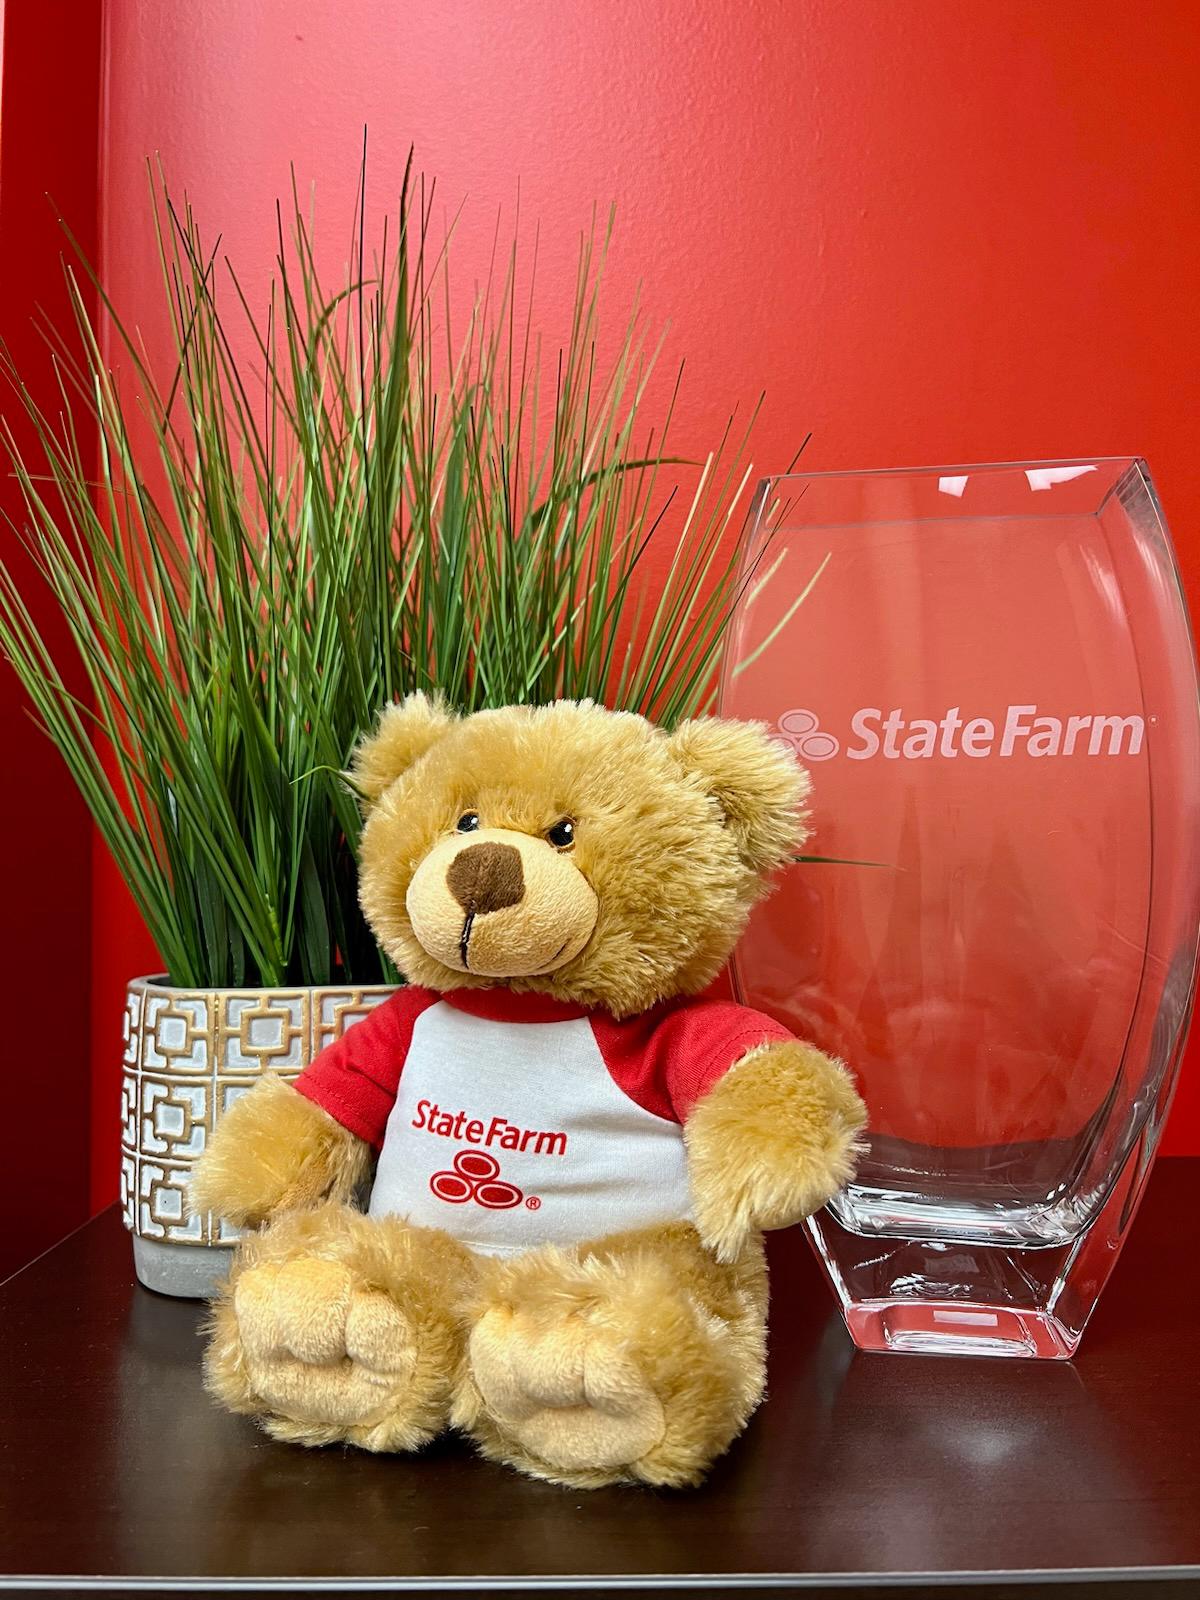 Call us for a quote today at Cassie Erschen State Farm insurance office Freeburg, IL